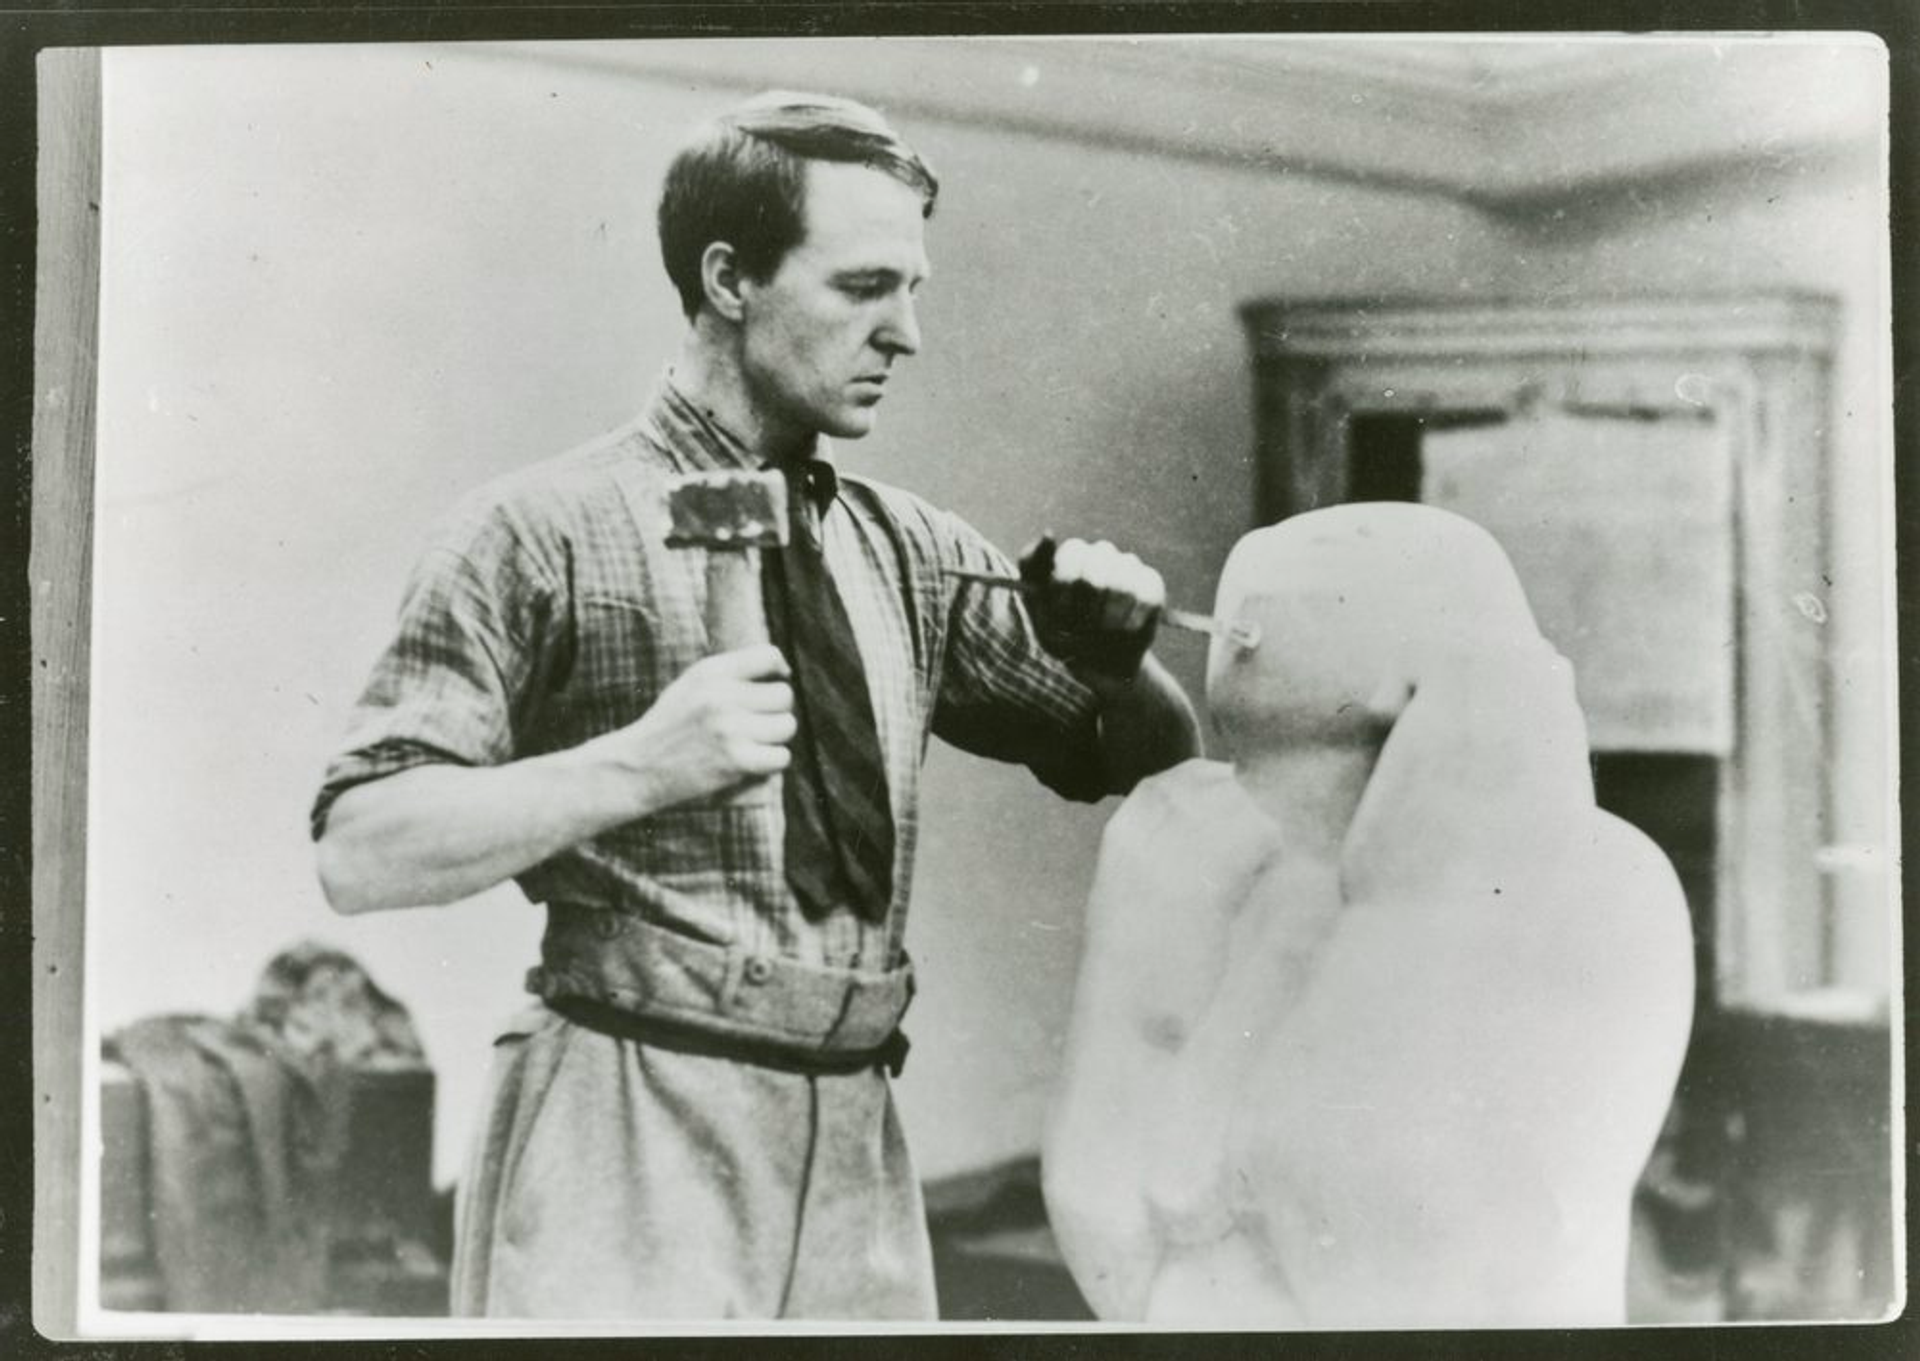  A black-and-white photograph capturing a young Henry Moore in his studio, actively engaged in sculpting. Moore is seen holding a hammer in one hand and a chisel in the other, seemingly working on the head of a sculpture that is still in progress.